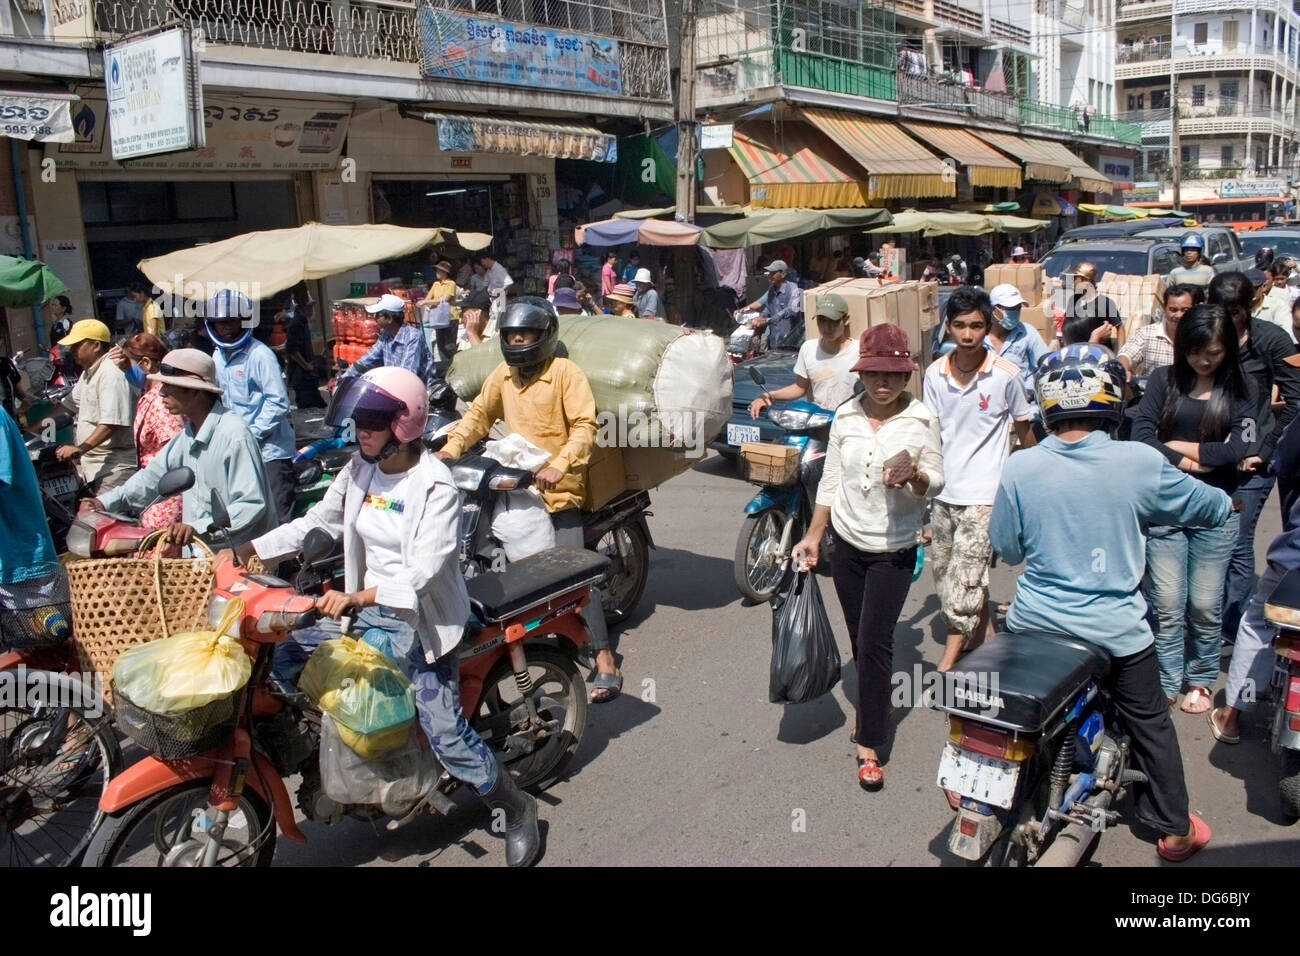 Several cyclo drivers are peddling along with motorcycle drivers on a busy street in Phnom Penh, Cambodia. Stock Photo